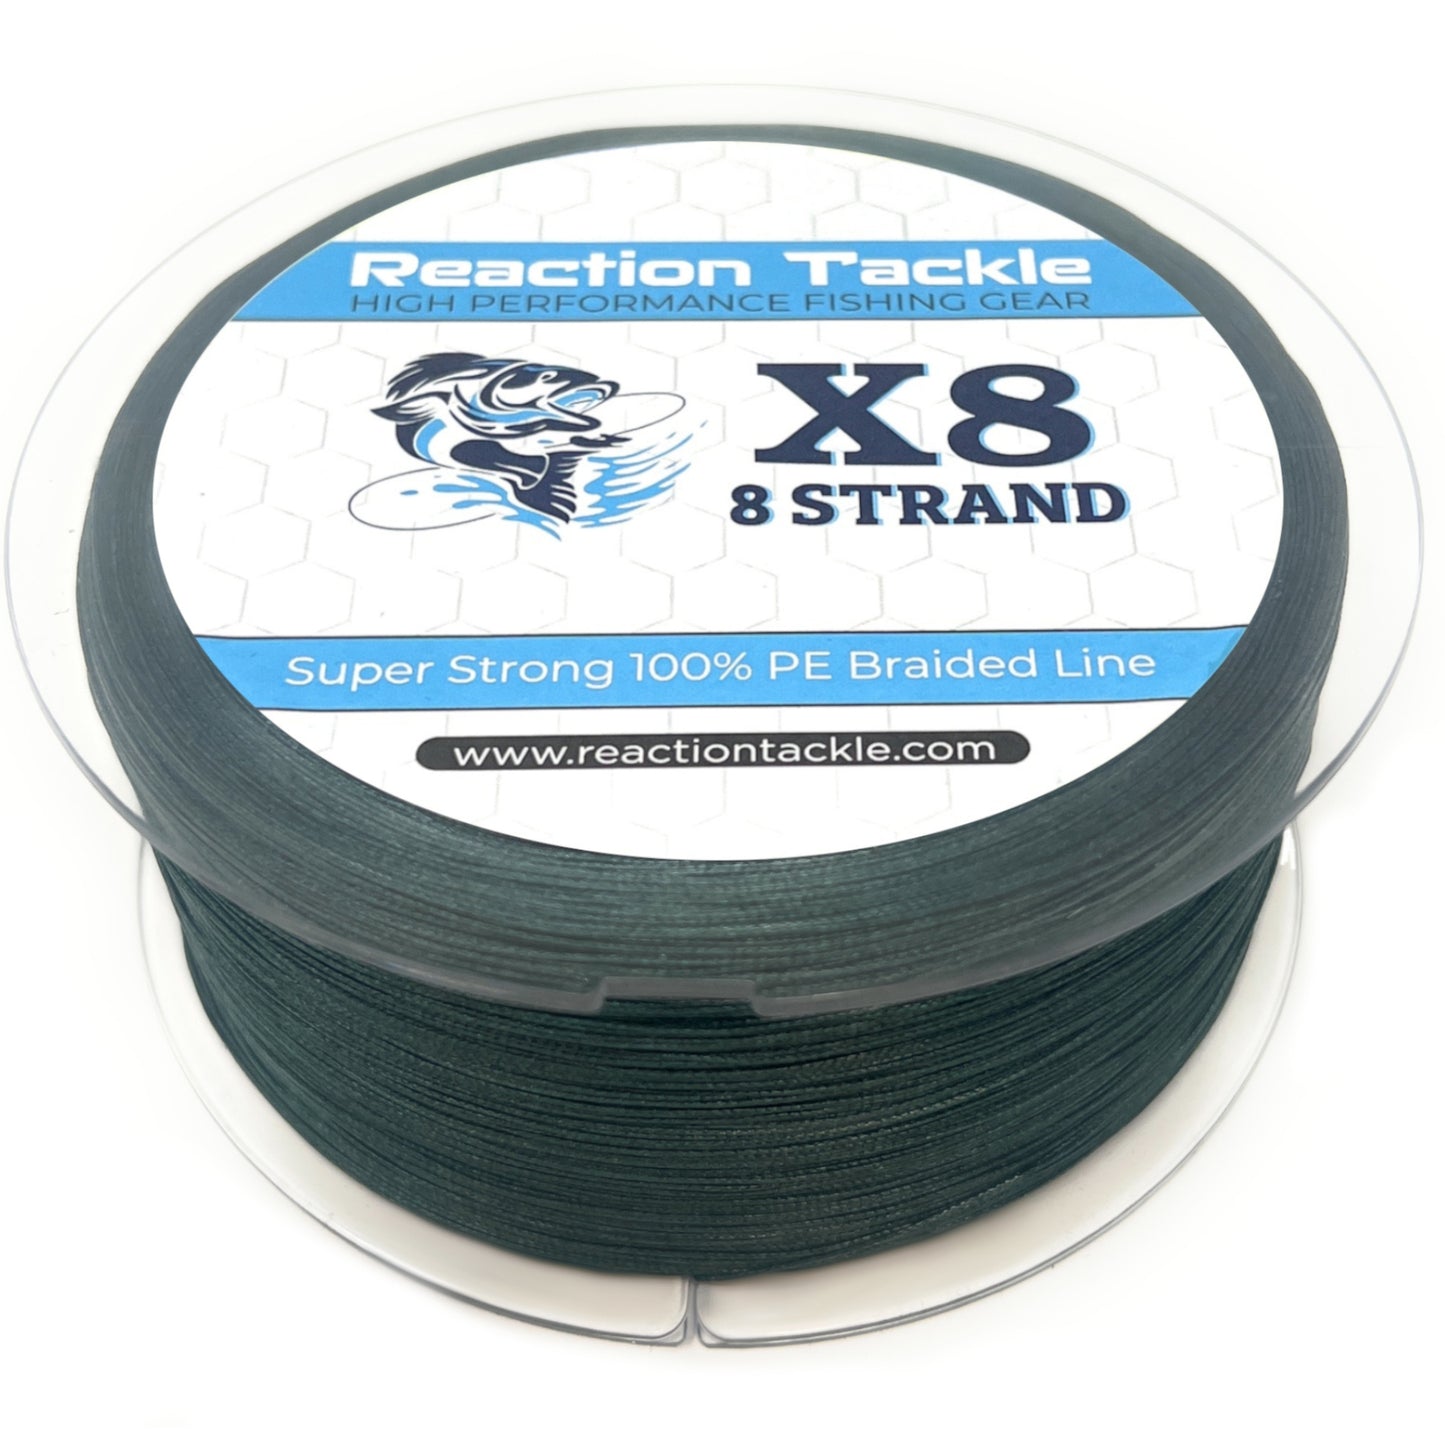 Reaction Tackle Braided Fishing Line - 8 Strand Moss Green 200lb 500yd